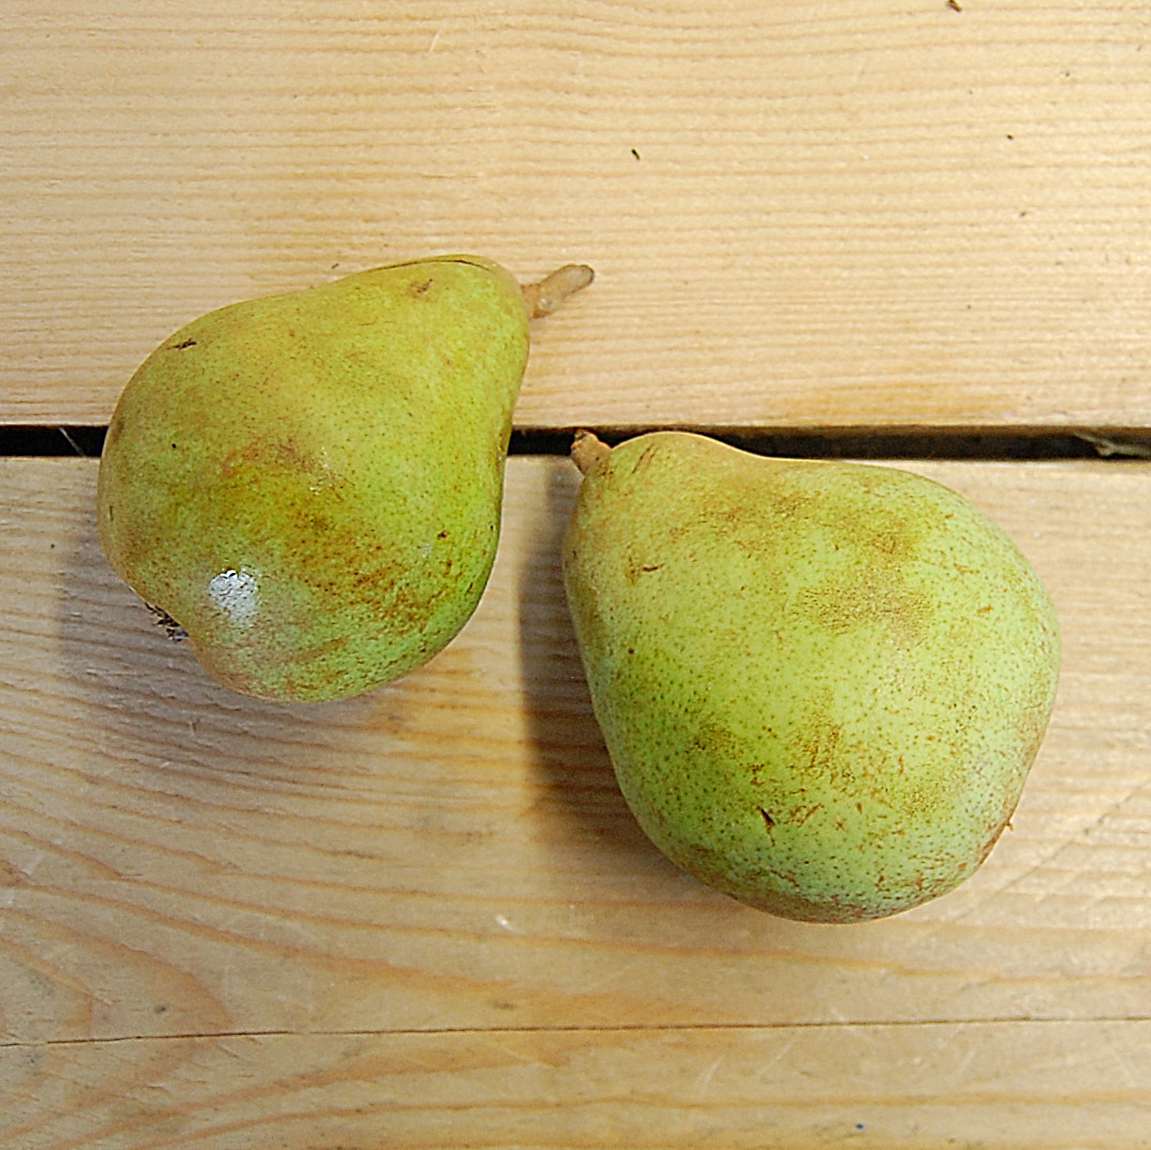 pears conference (bd) 600g suffolk